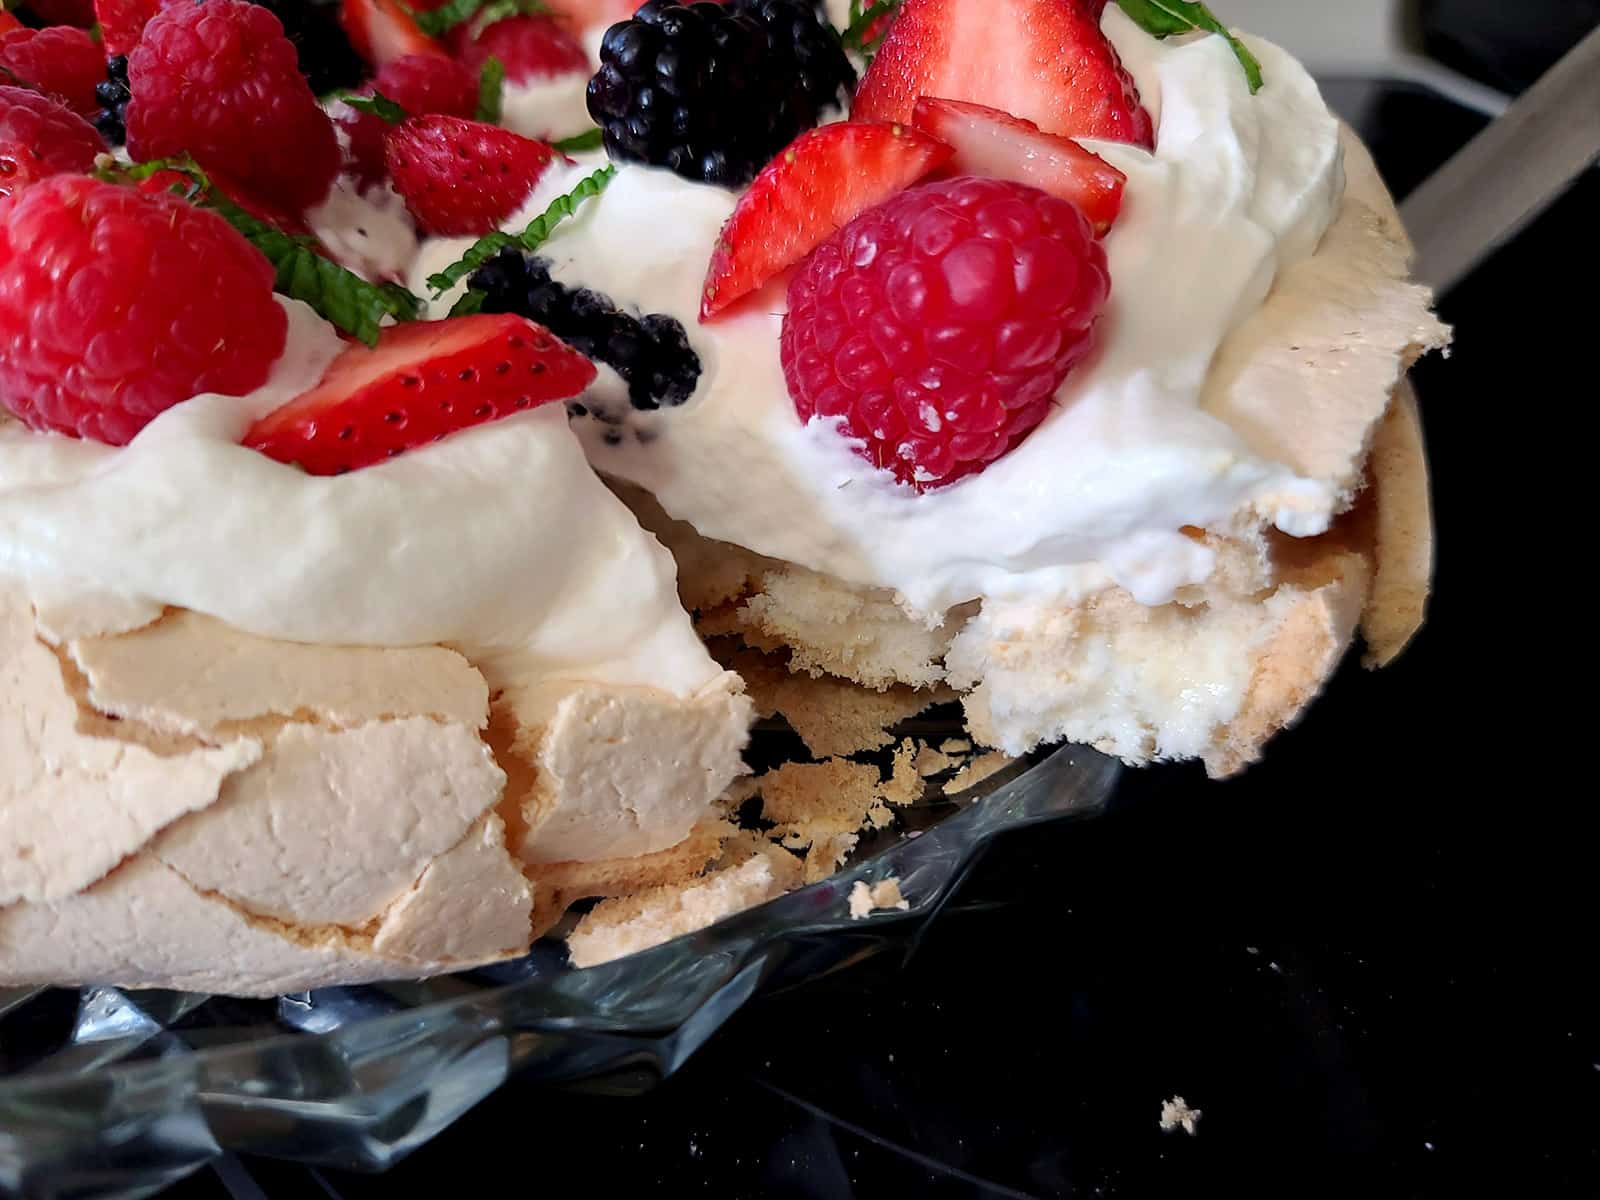 A close up photo of a slice of pavlova being lifted from the serving plate.